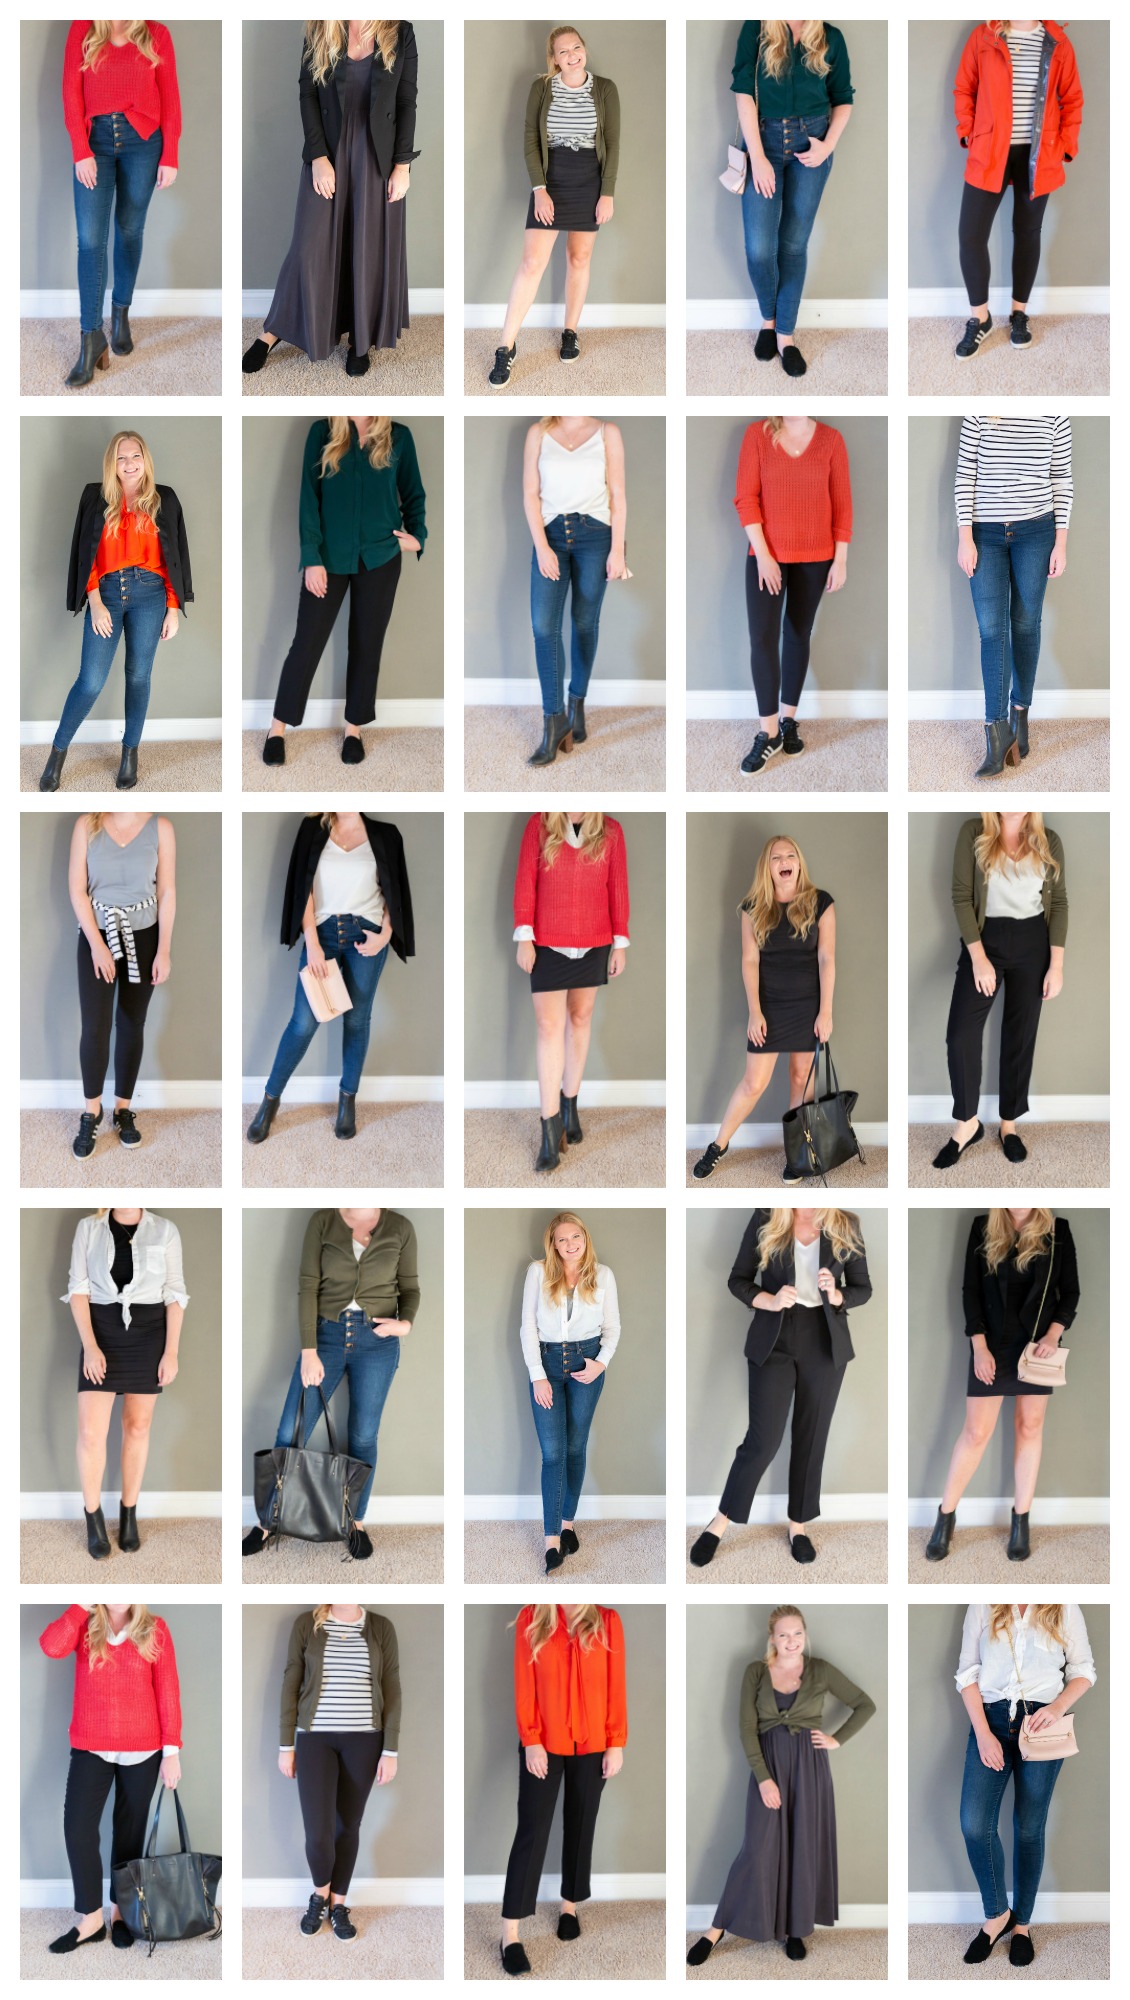 Travel Capsule Wardrobe The Best Packing List 14 Items 25 Outfits